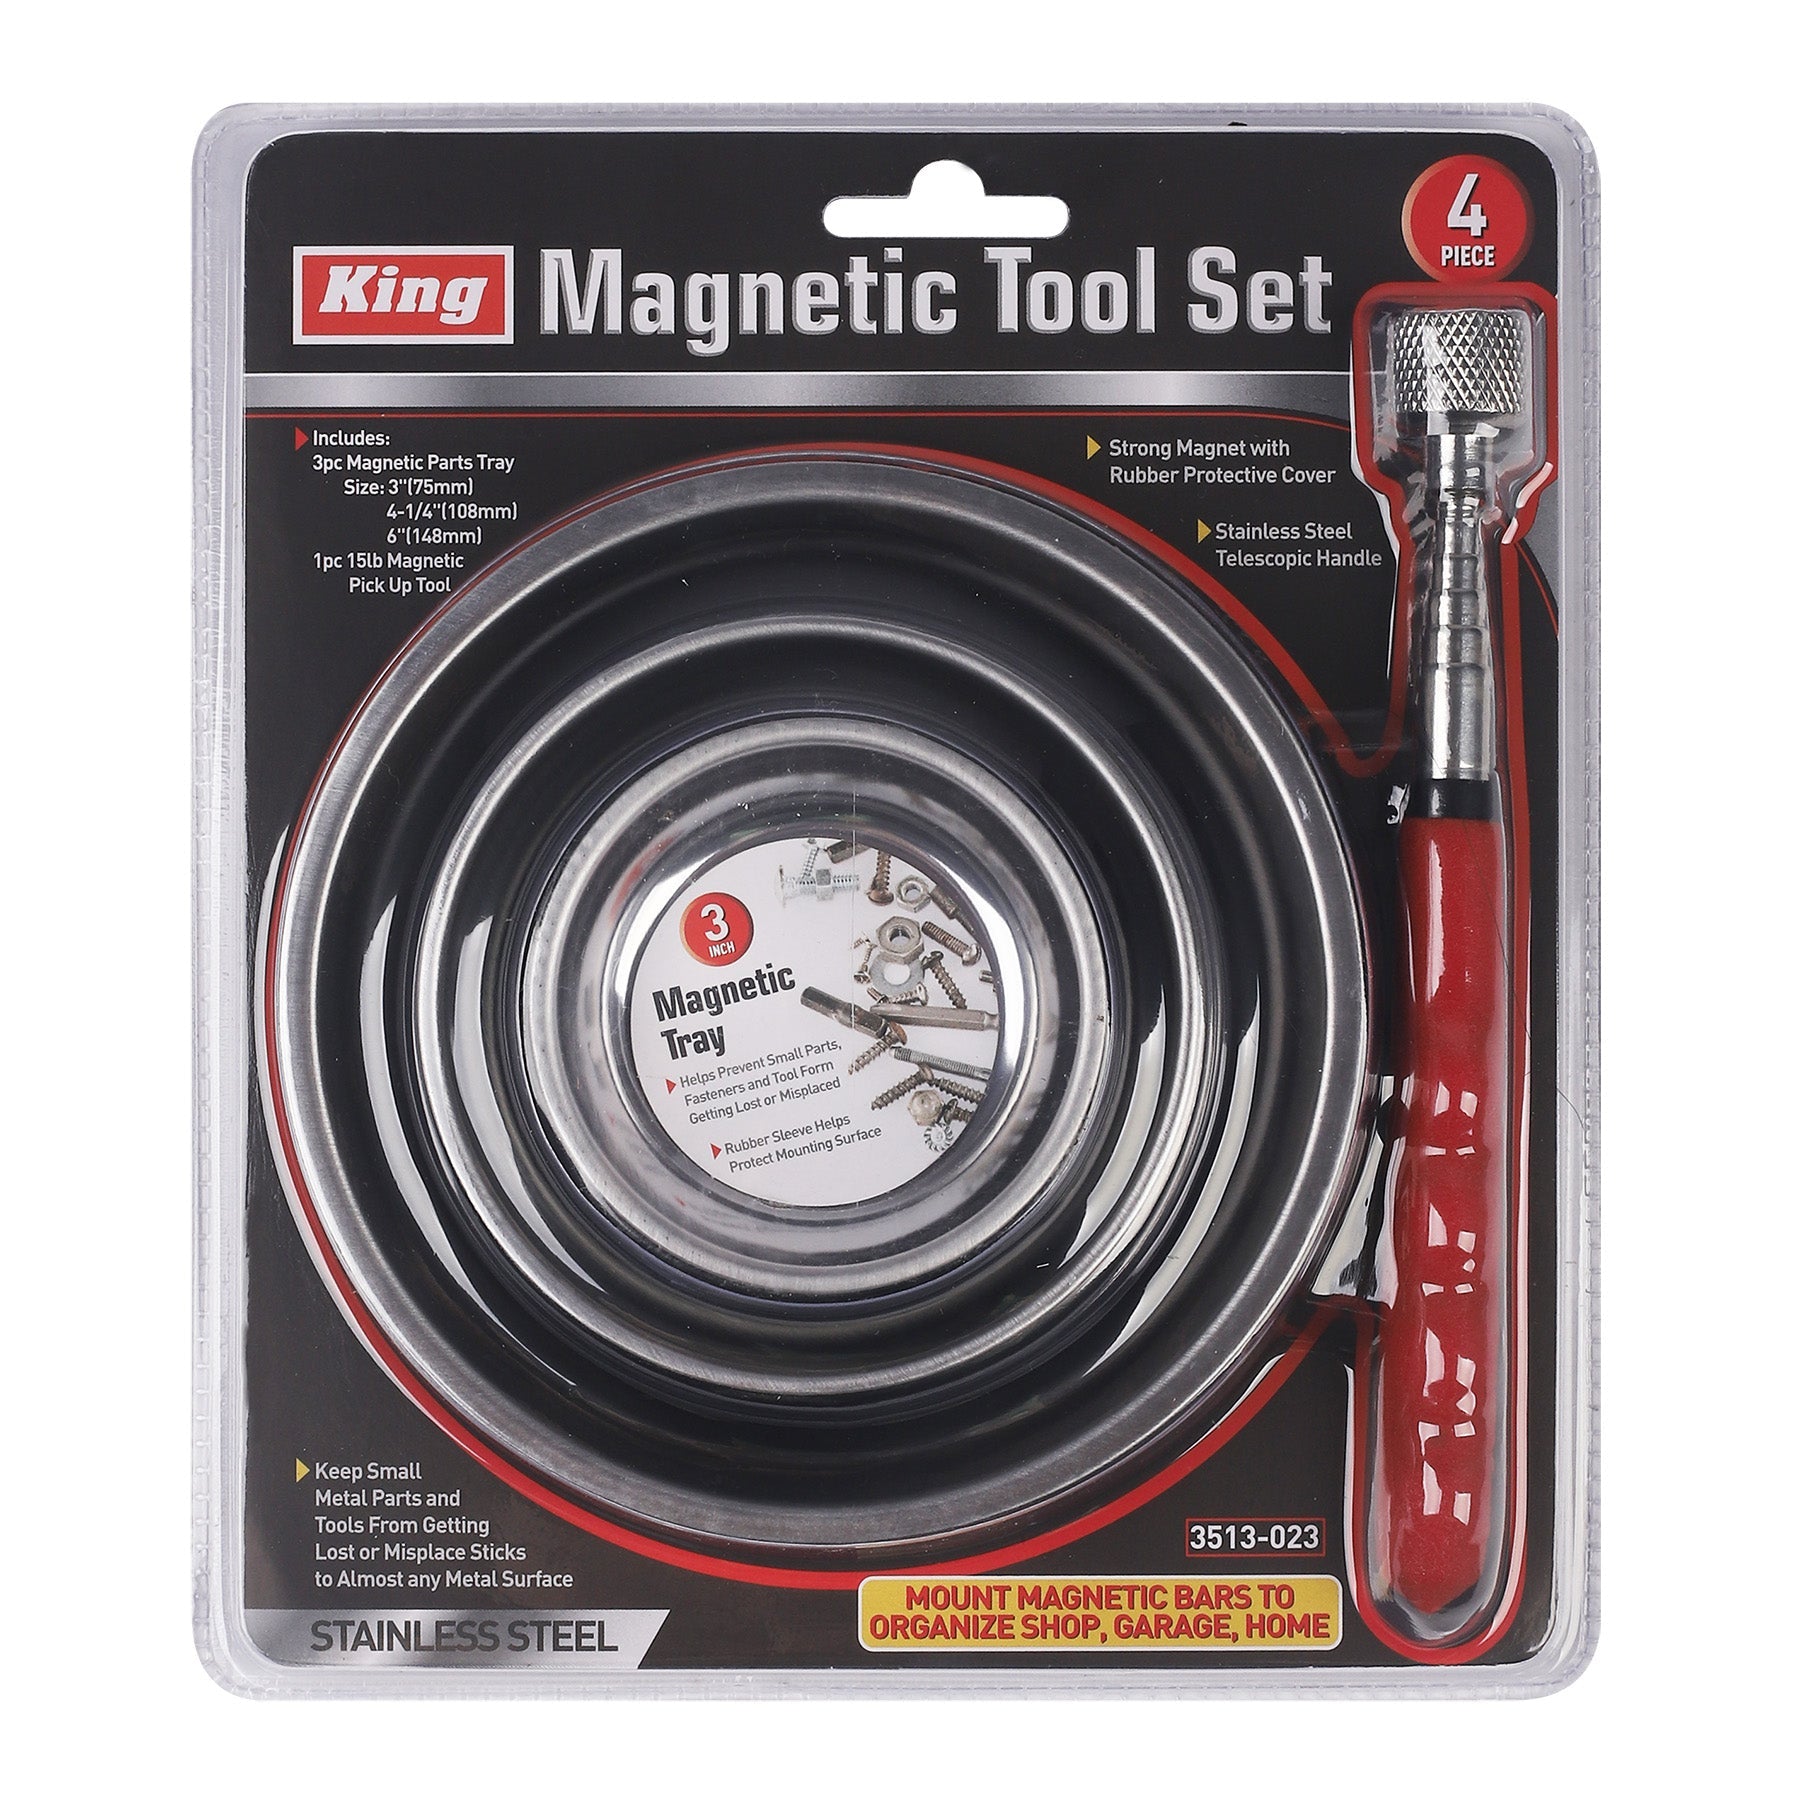 3513-0 - 4-PC MAGNETIC TRAY & TOOL SET, 3PC ROUND, 1PC 15 LBS PICK UP TOOL